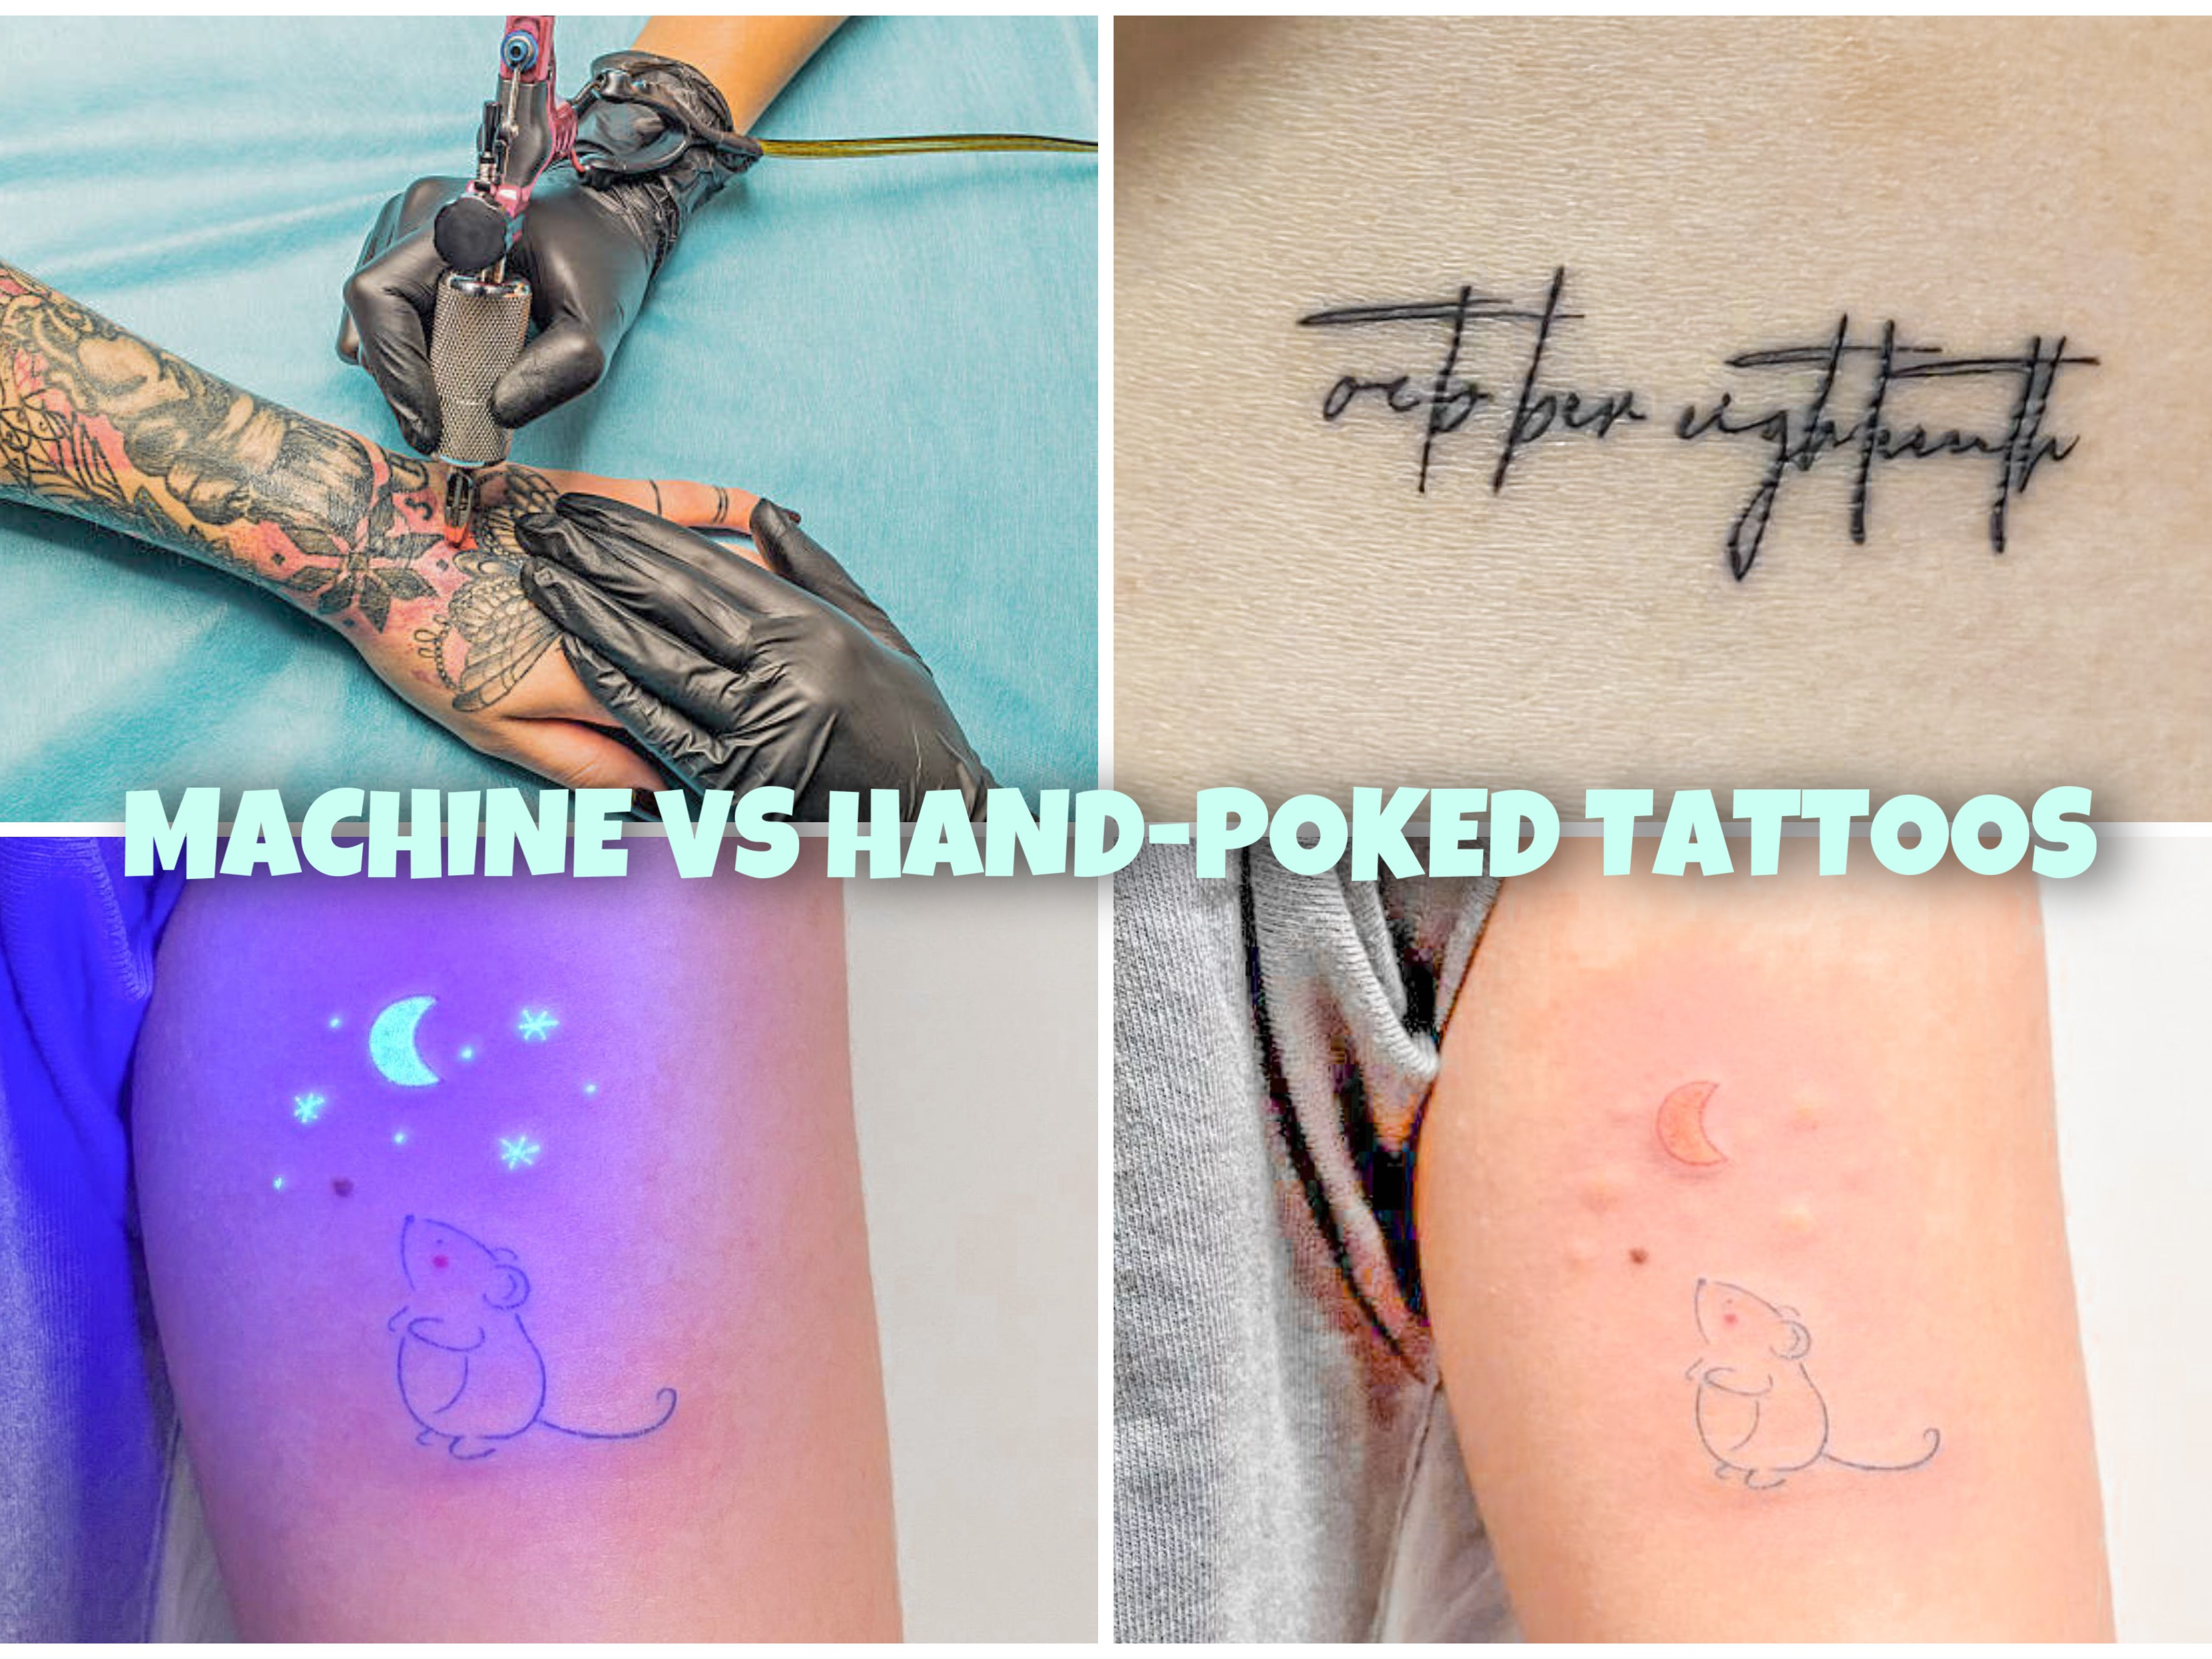 Whats The Difference Between Hand Poking and Machine Tattoos  Inside Out